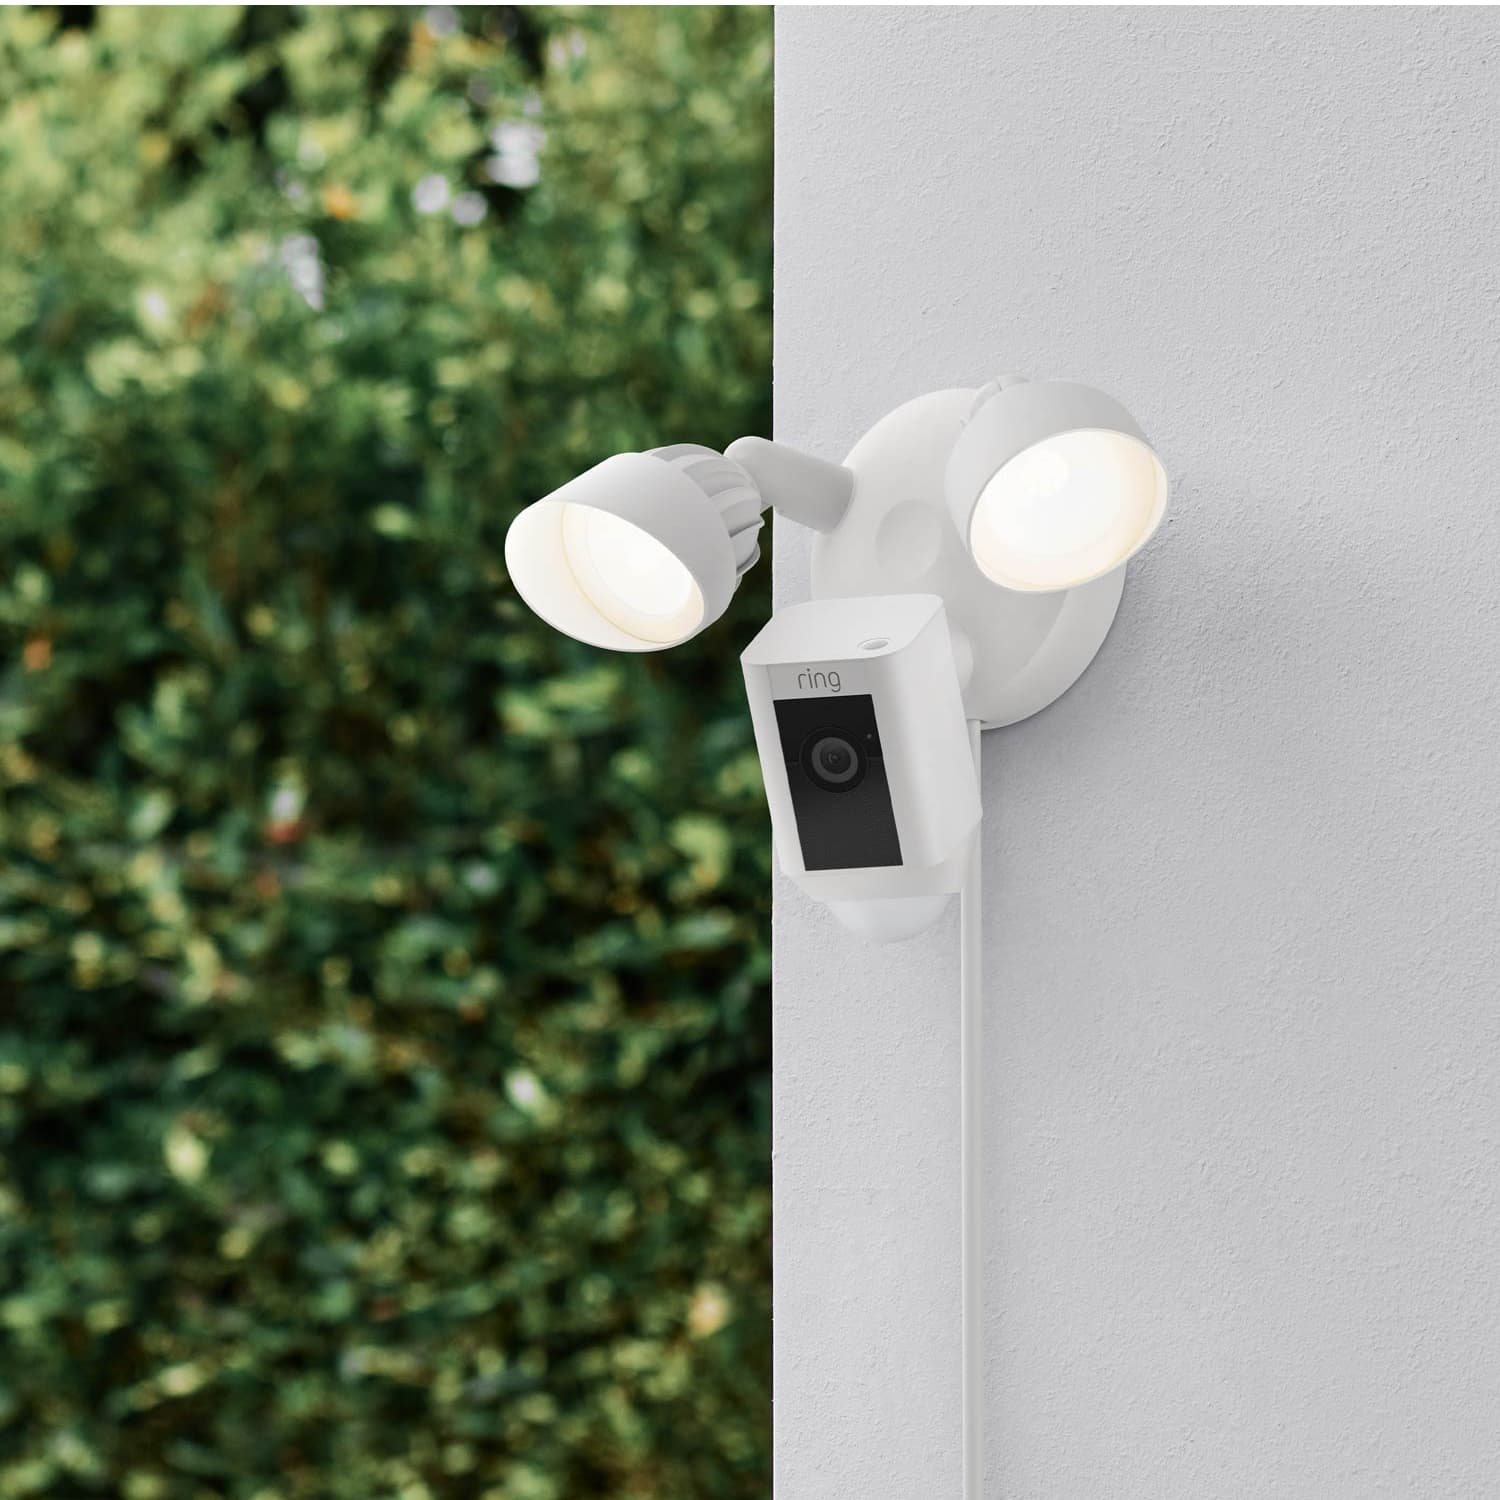 Floodlight Cam Plus (Plug-In) - Floodlight Cam Plus, Plug-In model in white mounted to exterior corner of home with both lights on.